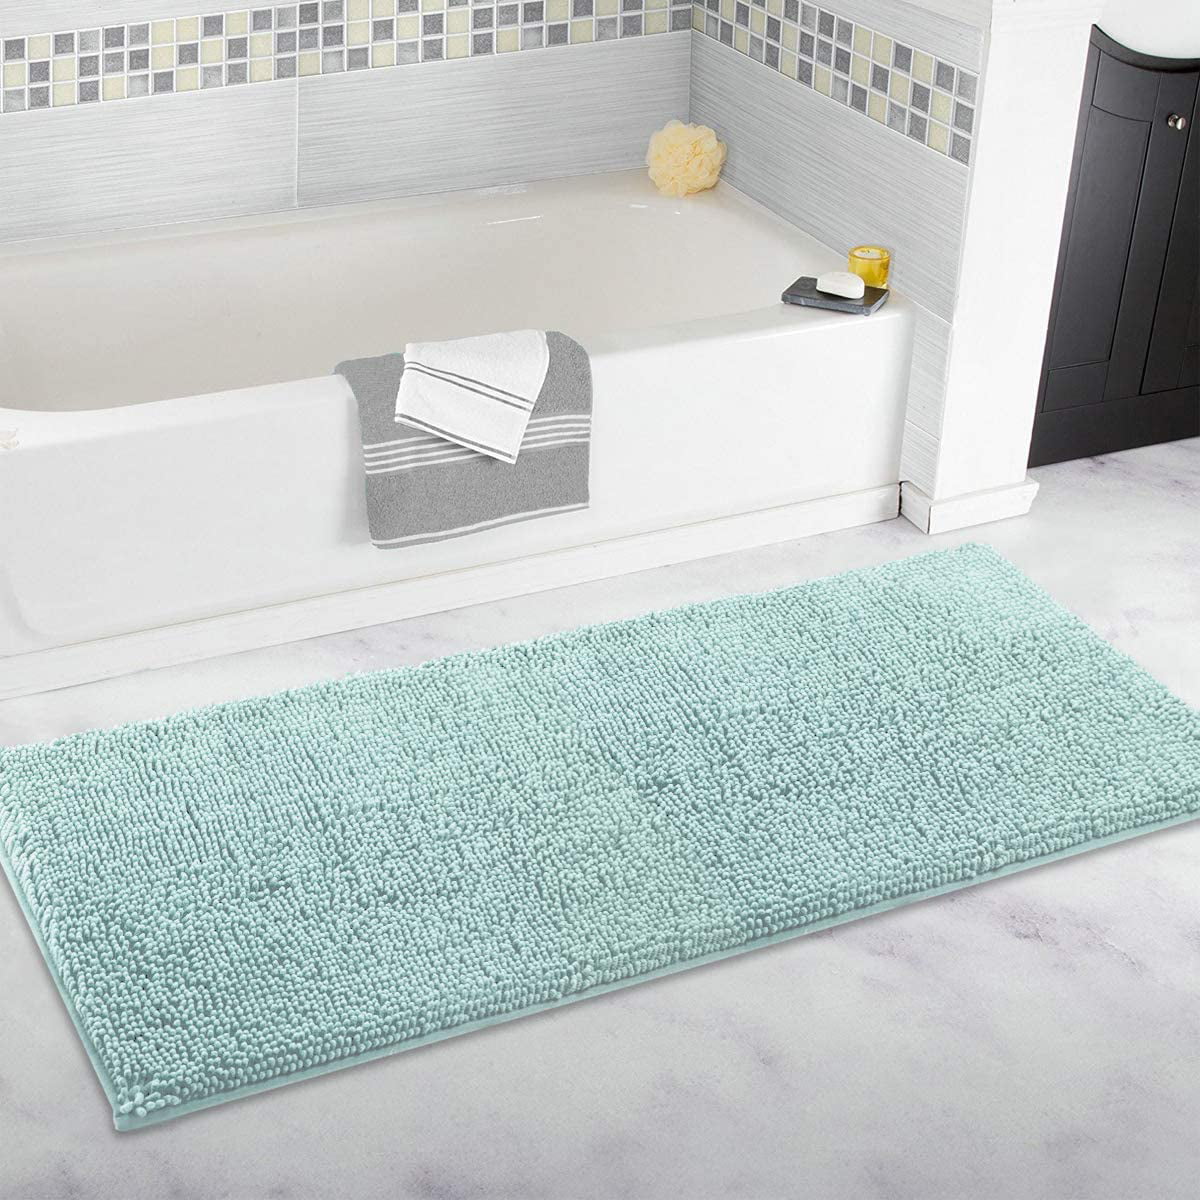 50x60 cm Navy Blue Machine Washable ITSOFT Non-Slip Shaggy Chenille Soft Microfibers Bathroom Rug with Water Absorbent 